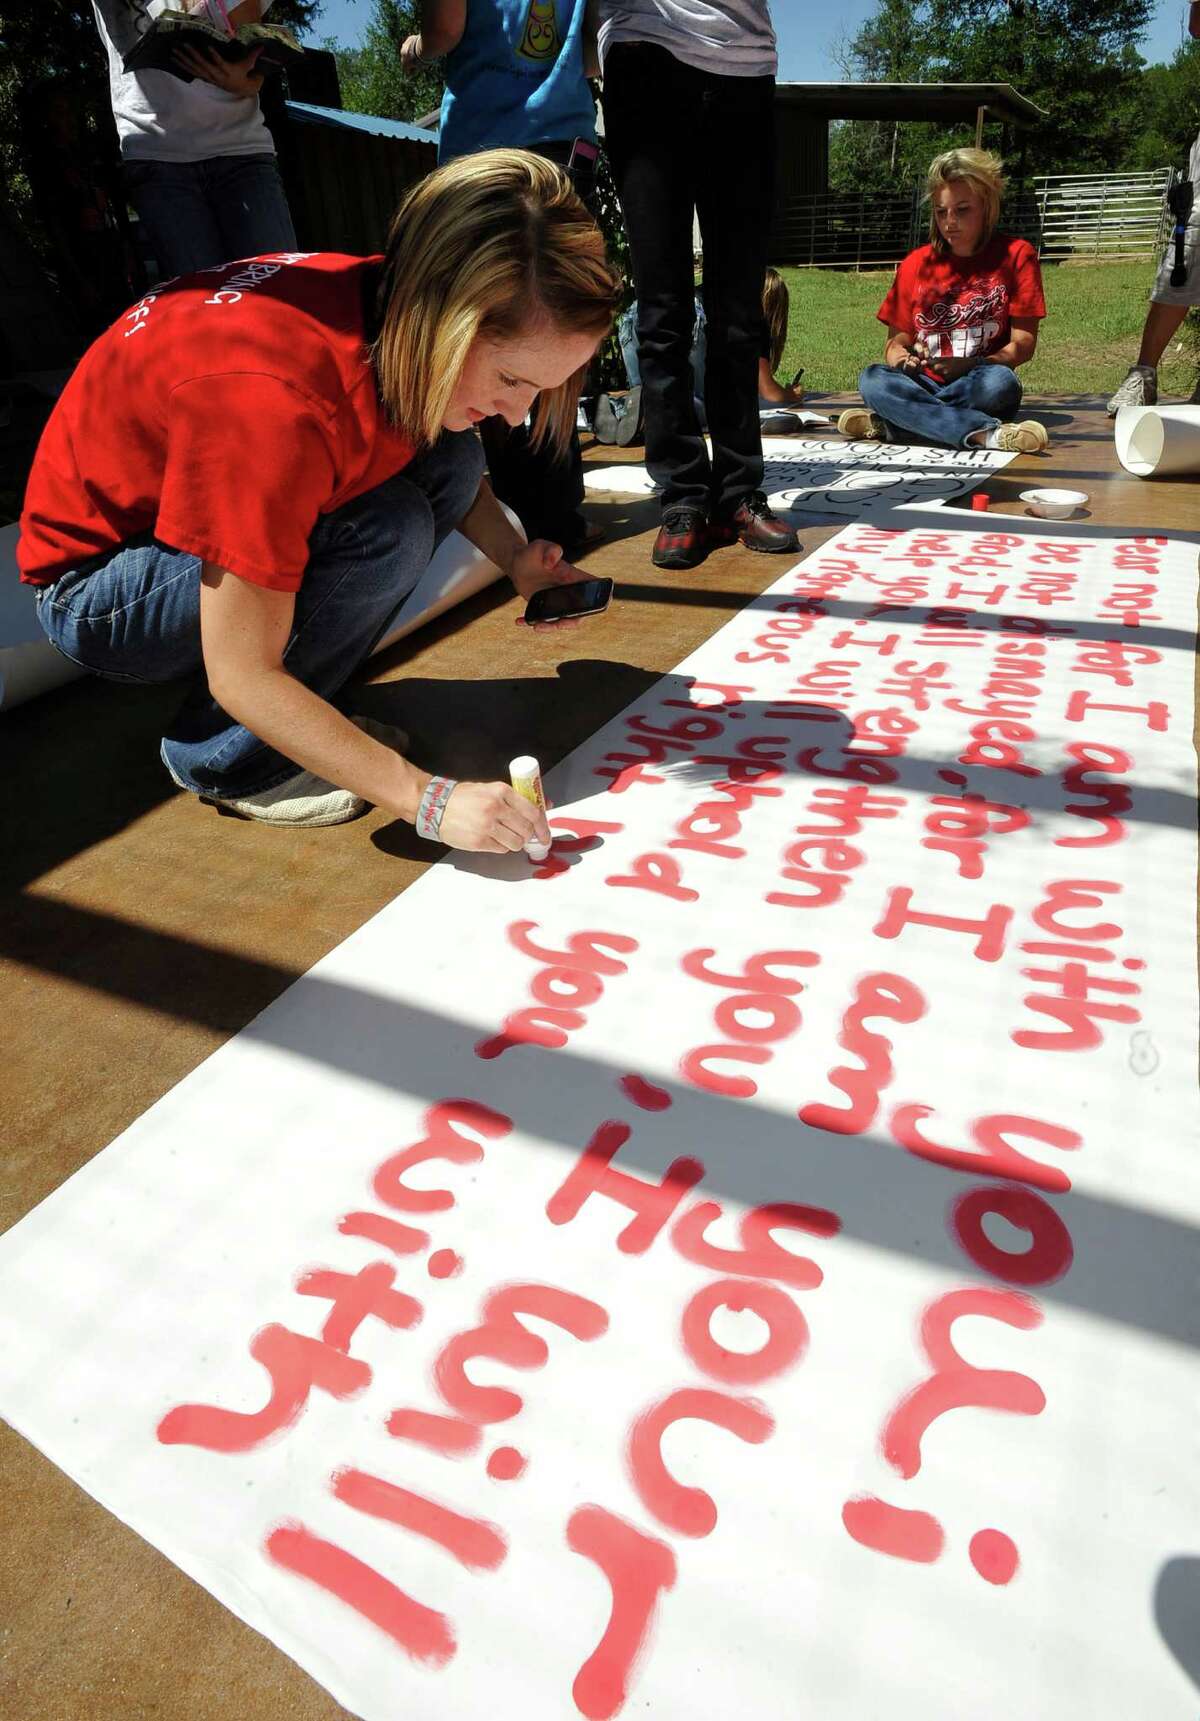 Brooke Coates, left, a cheerleader, paints a long sign on the patio. Kountze cheerleaders, friends and supportive parents who are standing up for their kids and their beliefs, were making signs and painting car windows Wednesday afternoon that will be seen around Kountze in support of the cheerleaders who were told they could not put scripture on their football signs. Each game this season, the Kountze cheerleaders have made Christian-themed run-through signs for the football players. The signs, which featured scripture verses, went viral and have now been stopped by the school district's leaders who were told by a group the signs were offensive and against the separation of church and state. Dave Ryan/The Enterprise